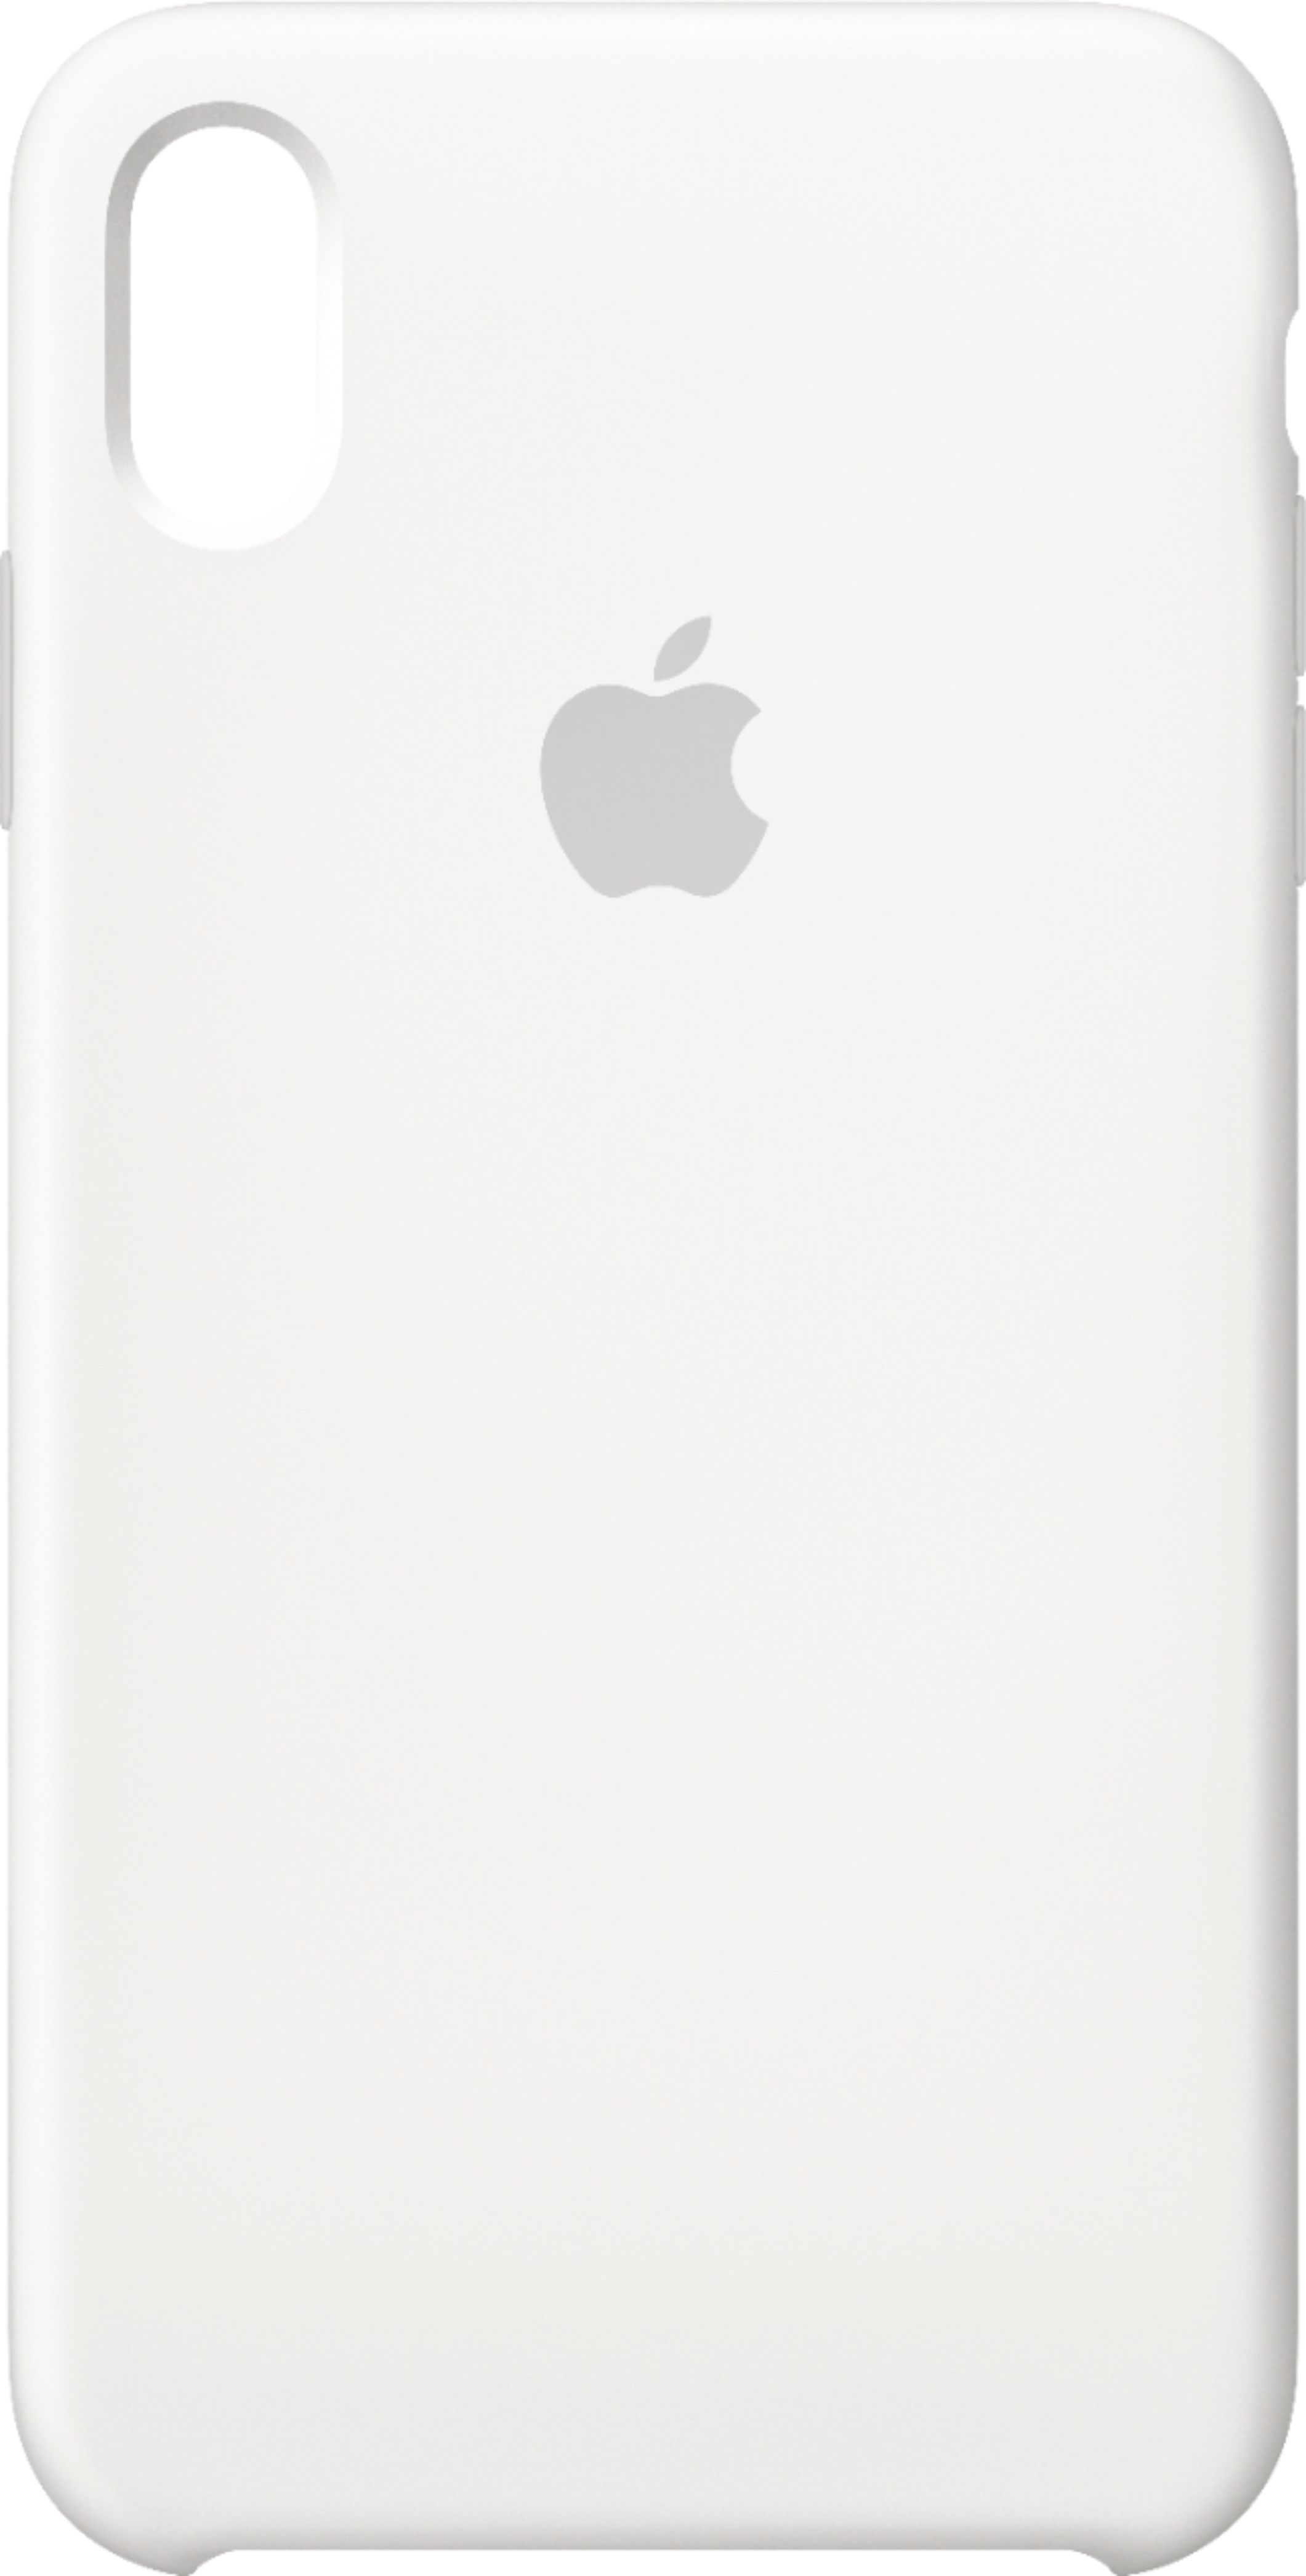 Apple Iphone Xs Max Silicone Case White Mrwf2zm A Best Buy